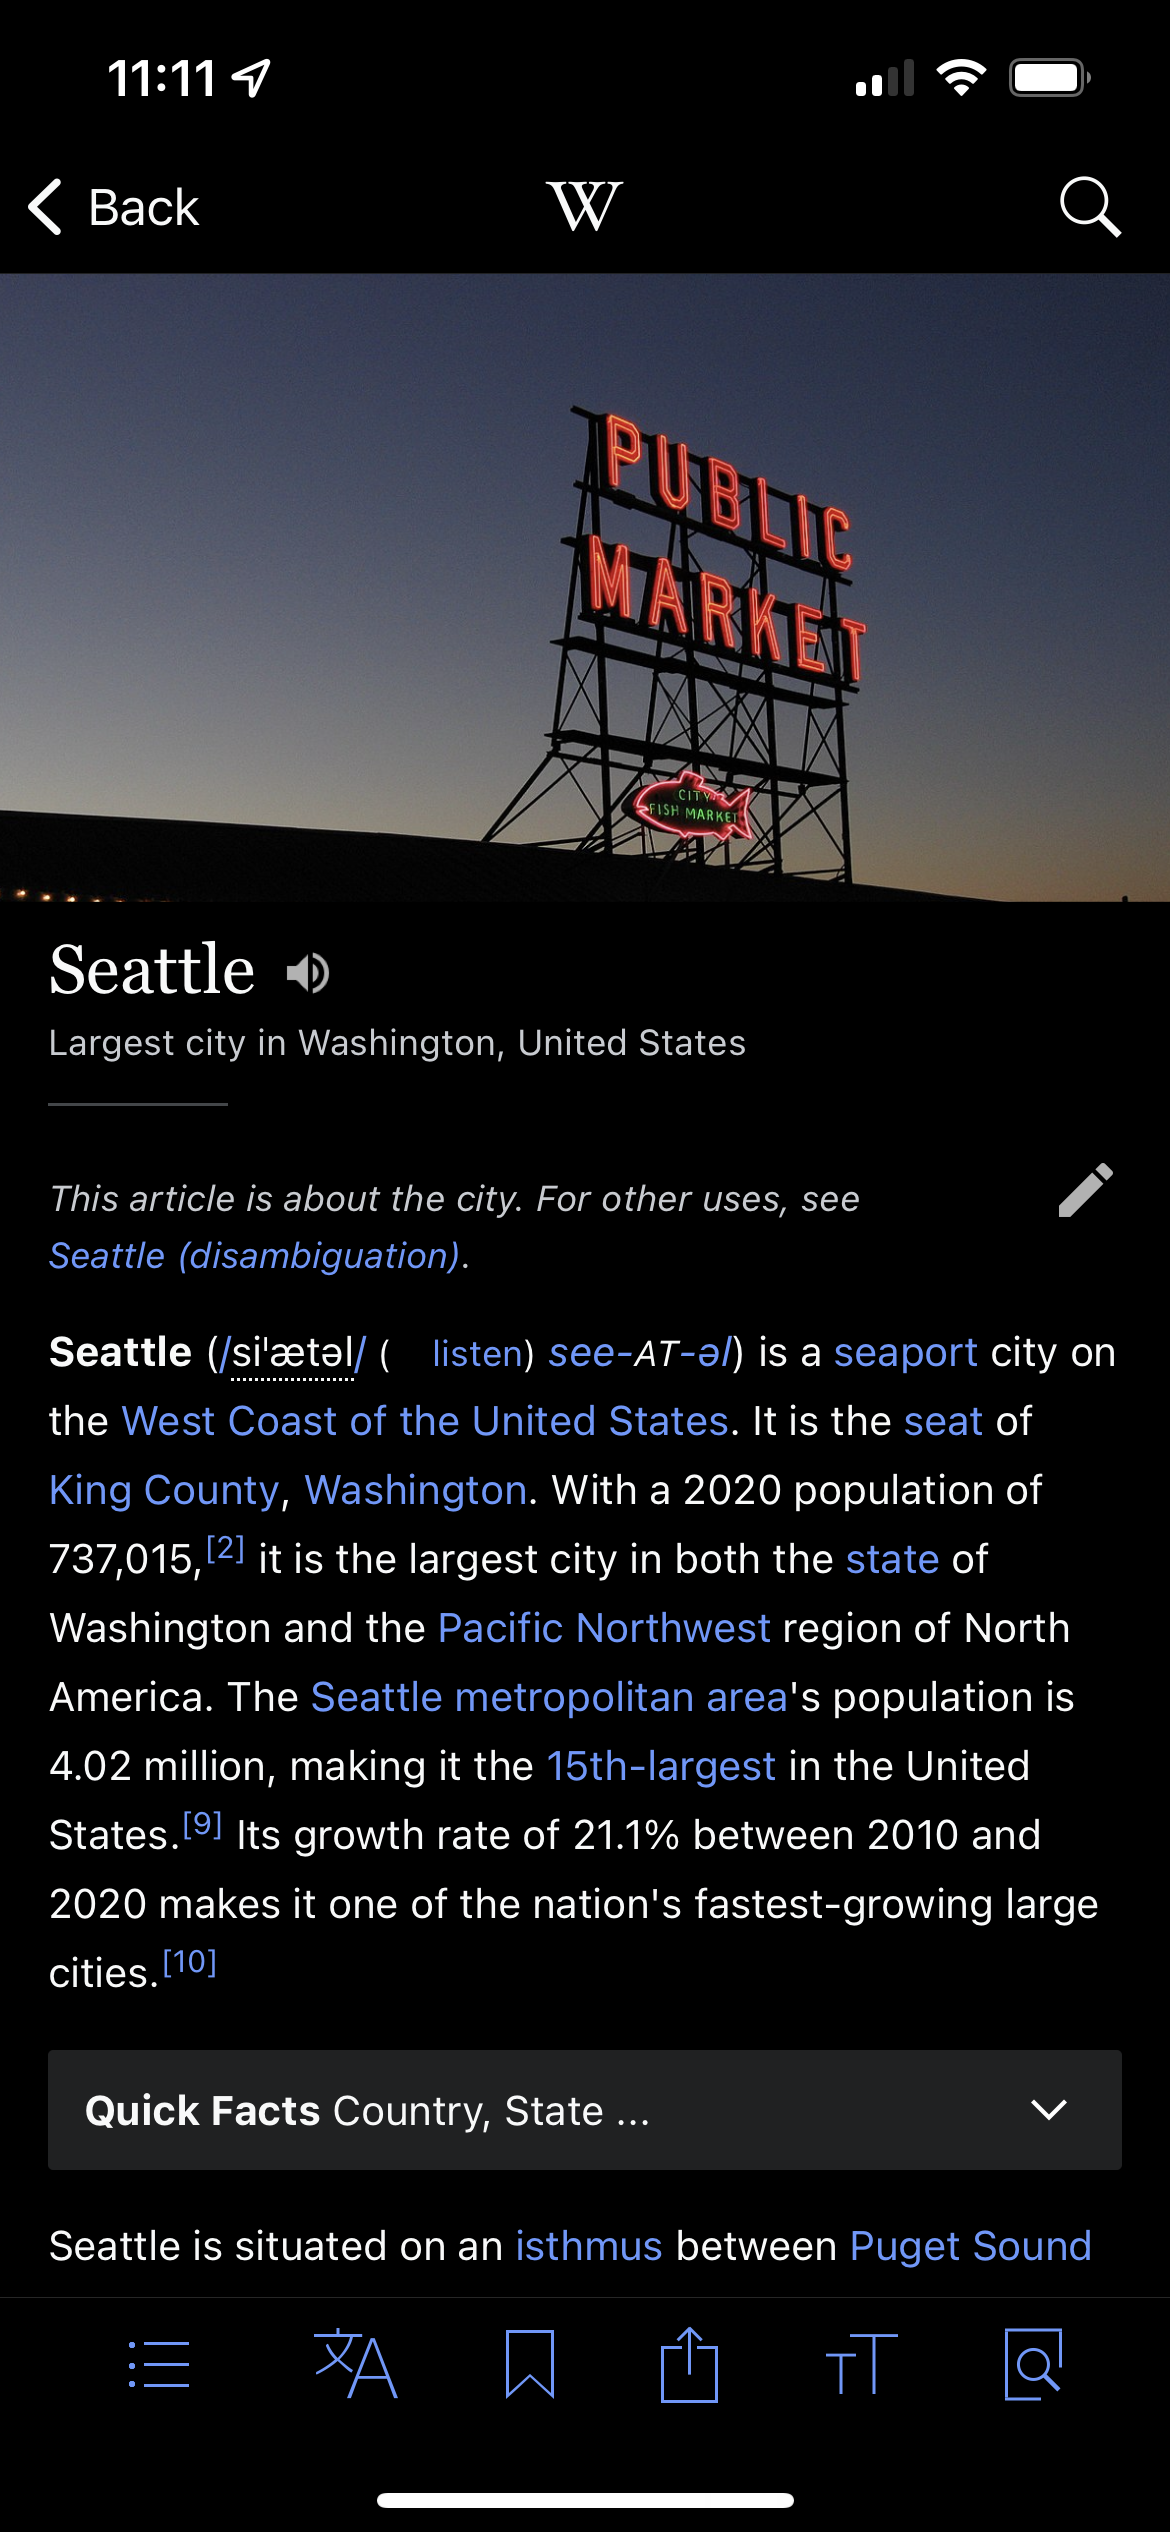 A screenshot of the Wikipedia app on iPhone.